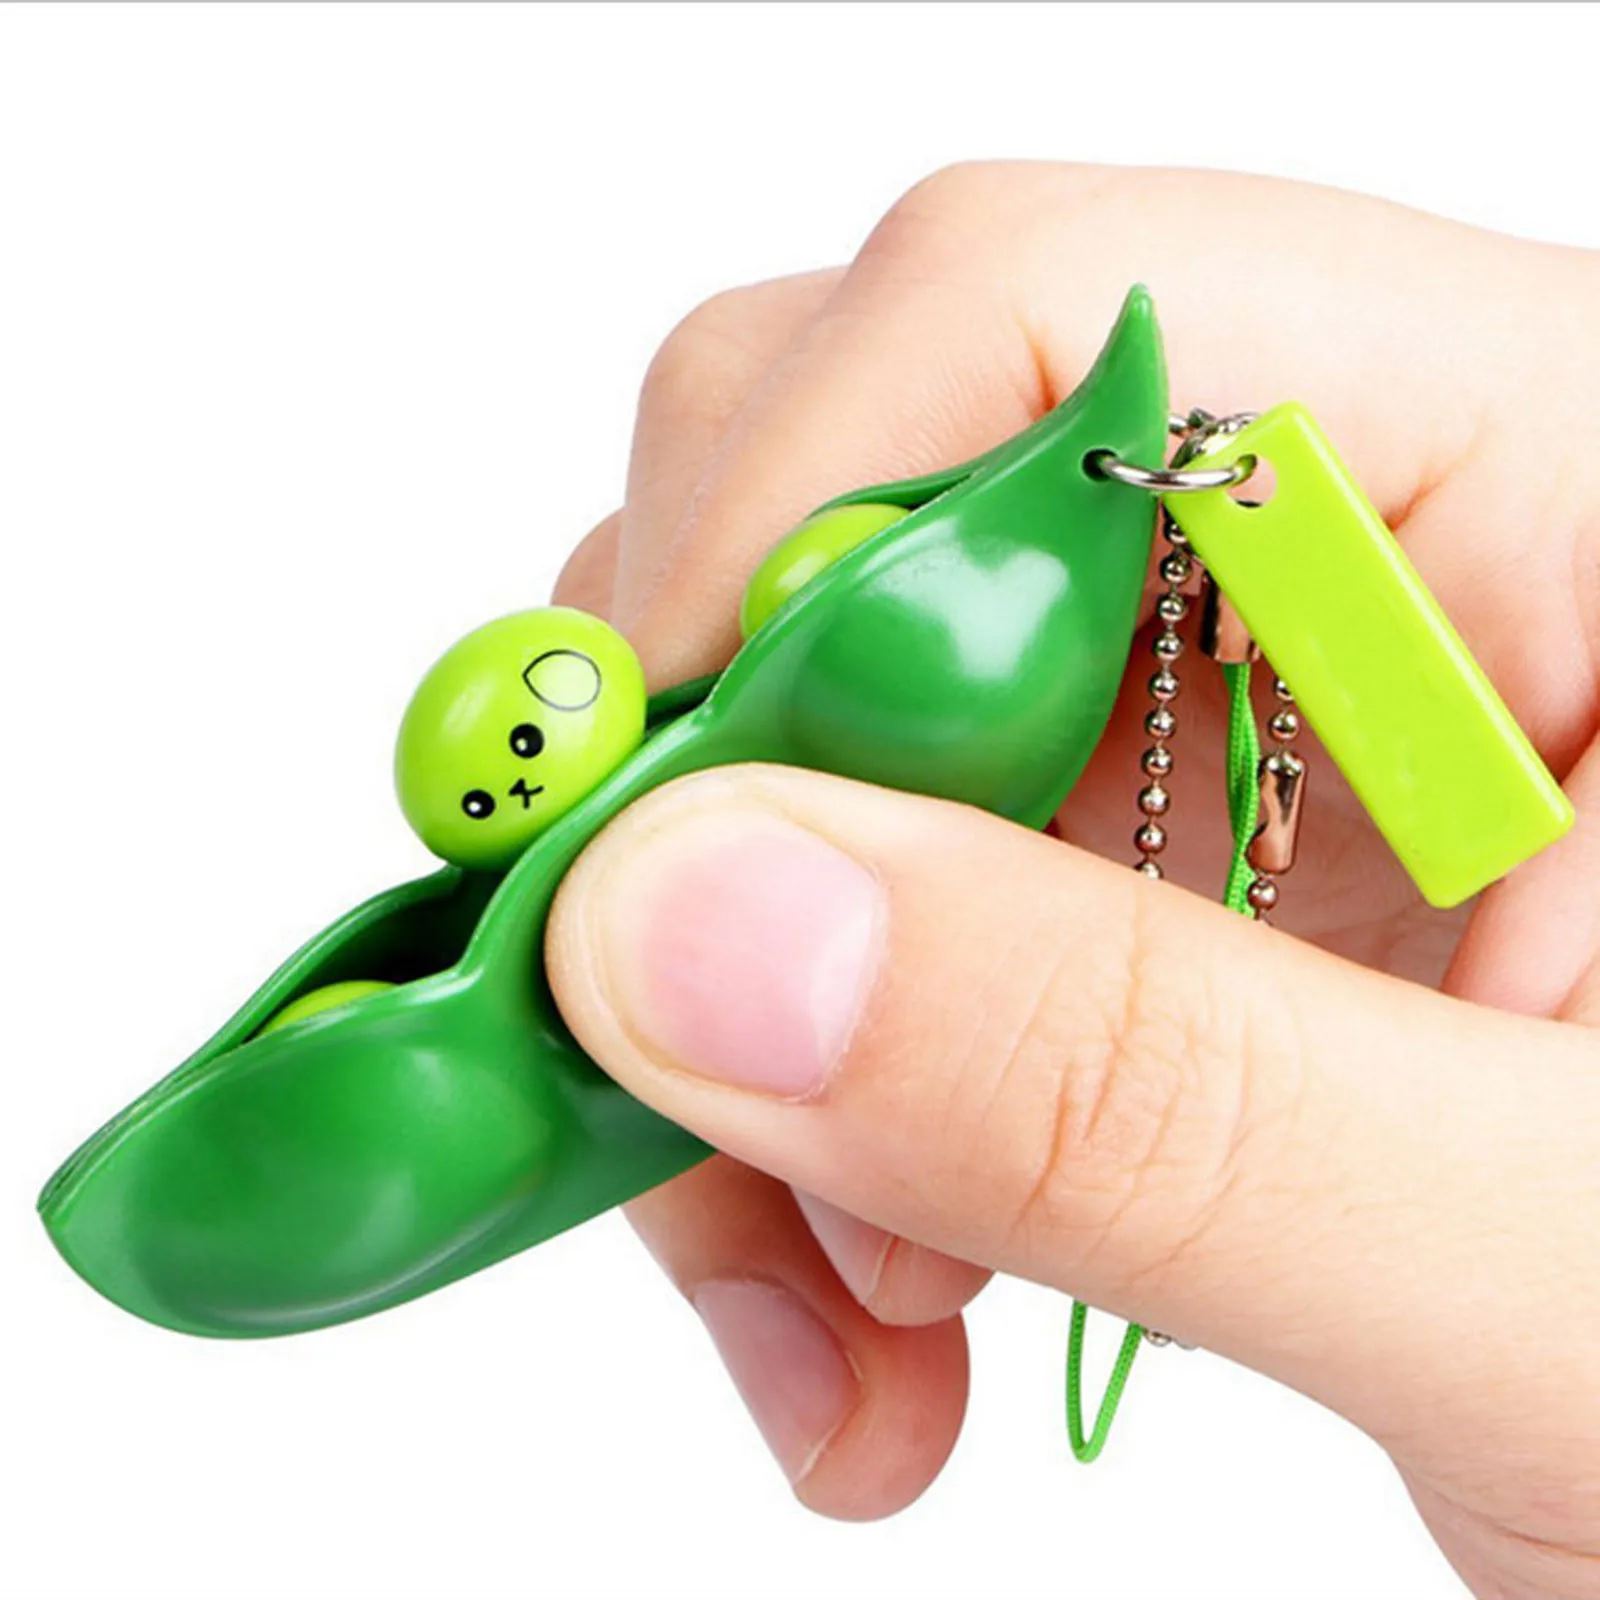 Decompression Toys Pop It Squishy Squeeze Peas Beans Keychain Cute Stress Adult Toy Rubber Boys Gift